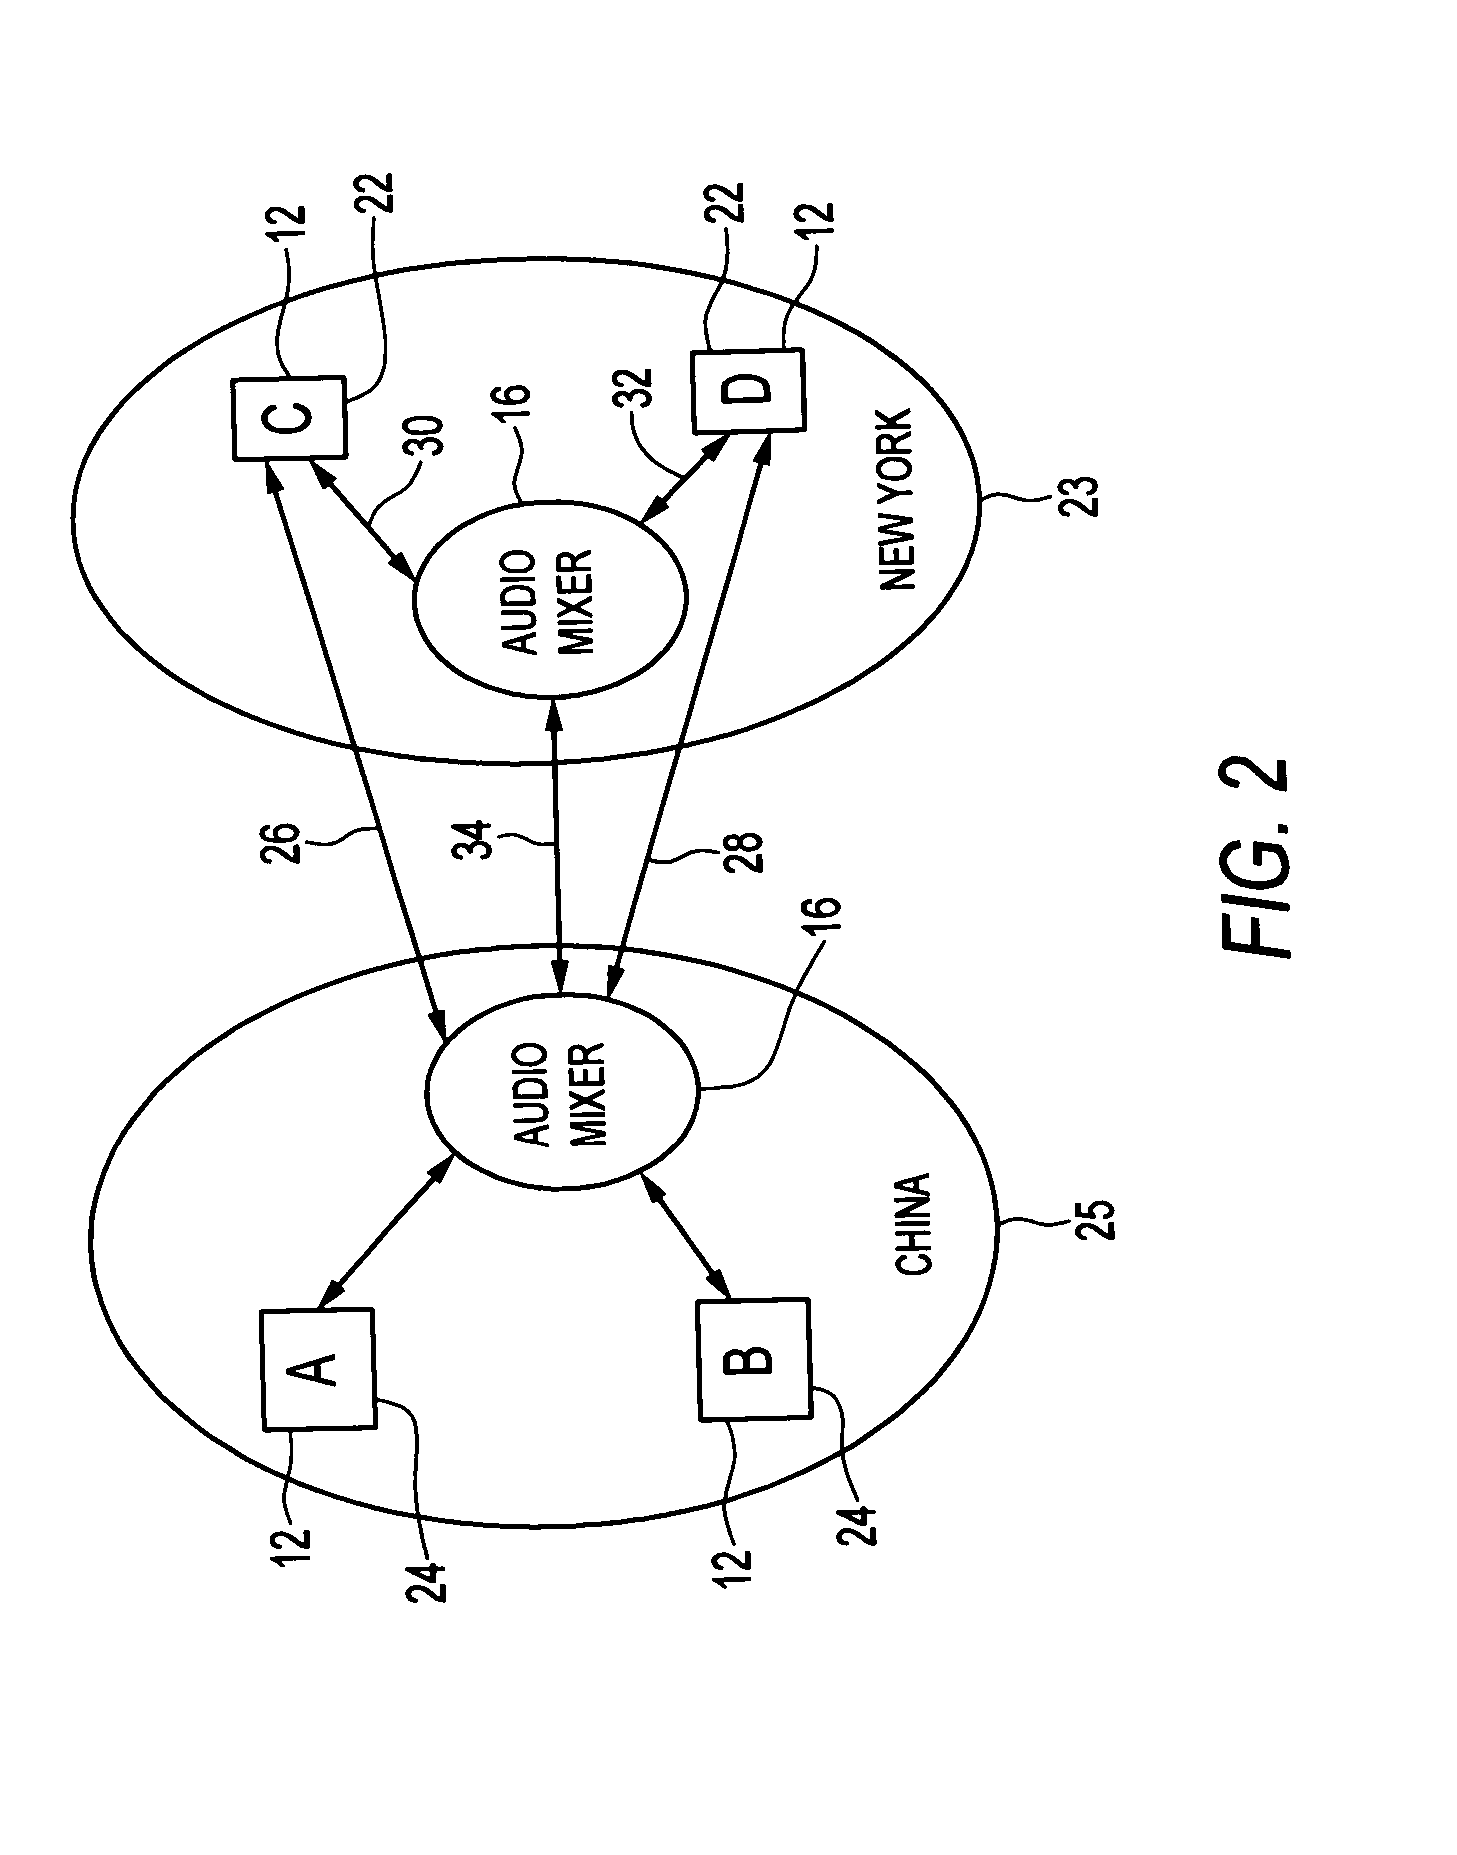 System and apparatus for geographically distributed VoIP conference service with enhanced QoS